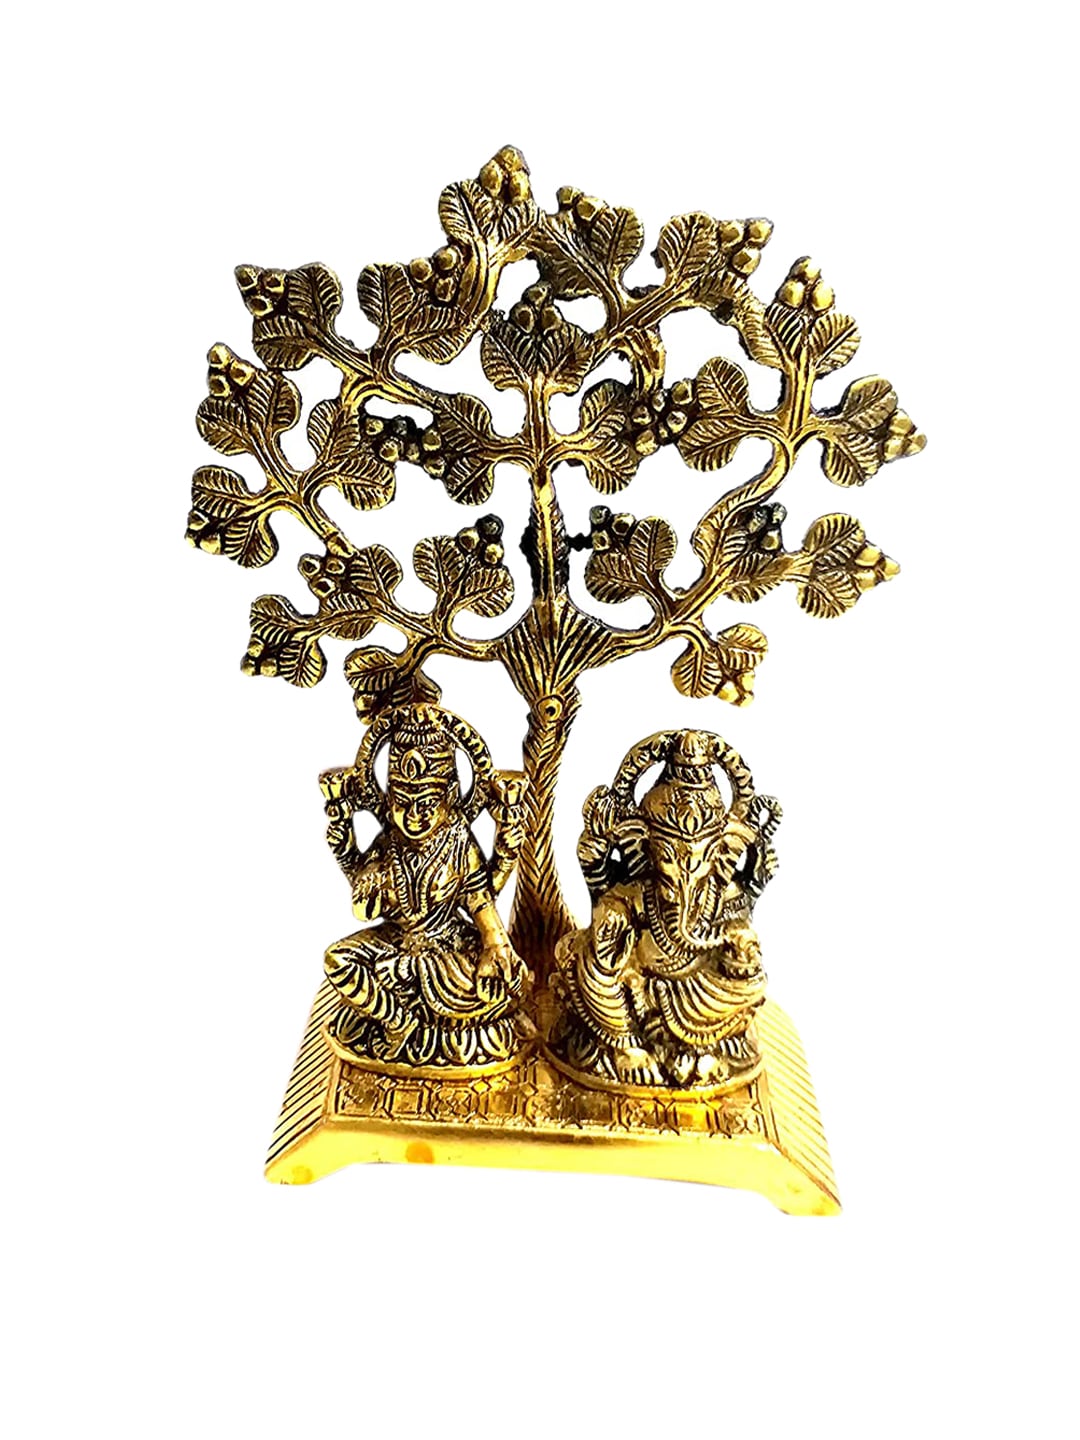 WENS Gold Toned Laxmi Ganesh Idol Sitting Under Tree For Diwali Home Decoartion Price in India